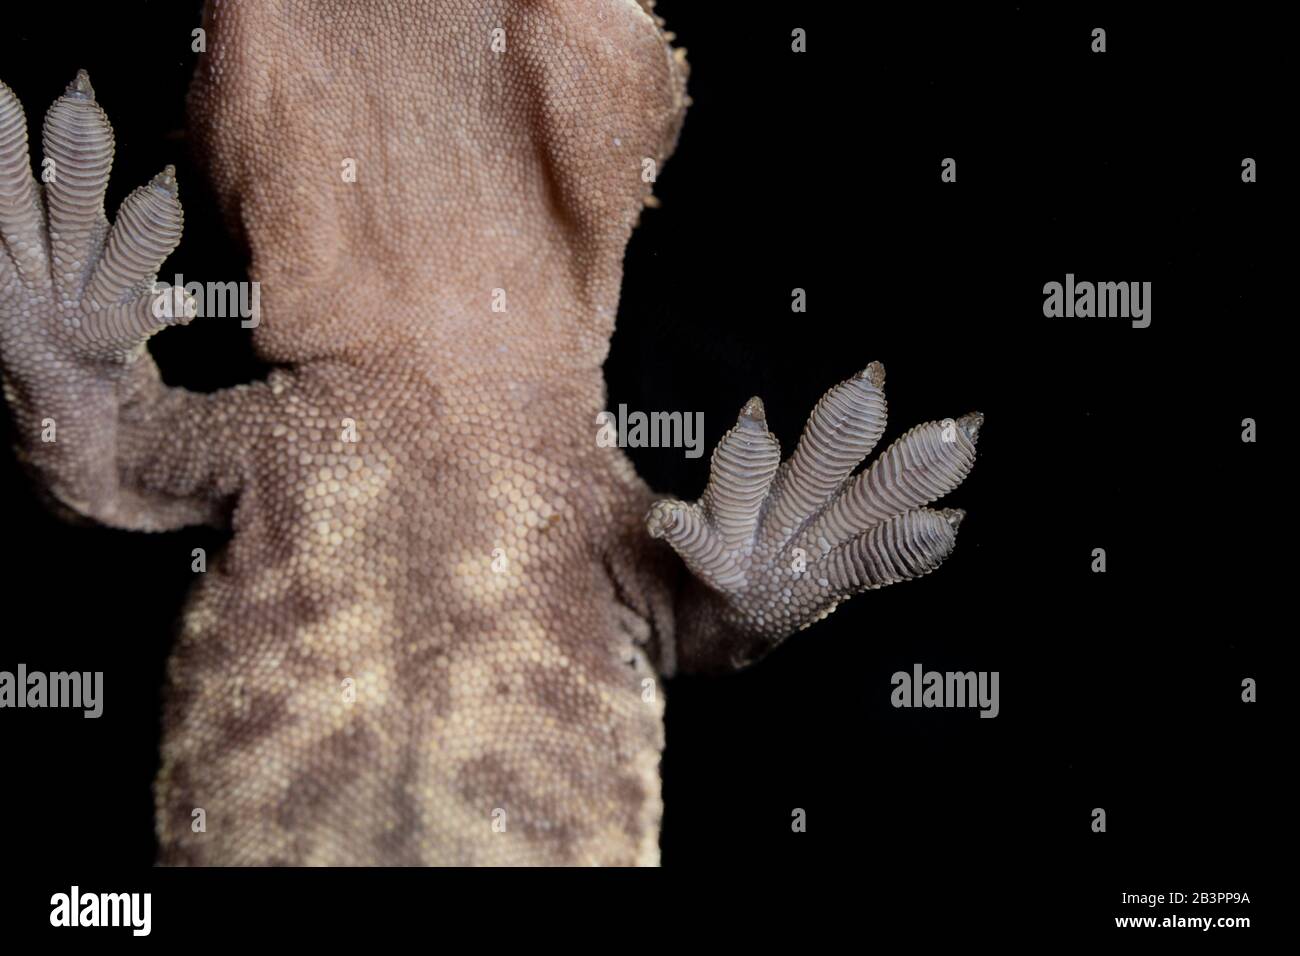 Crested Gecko Foot sticking to a piece of glass Stock Photo